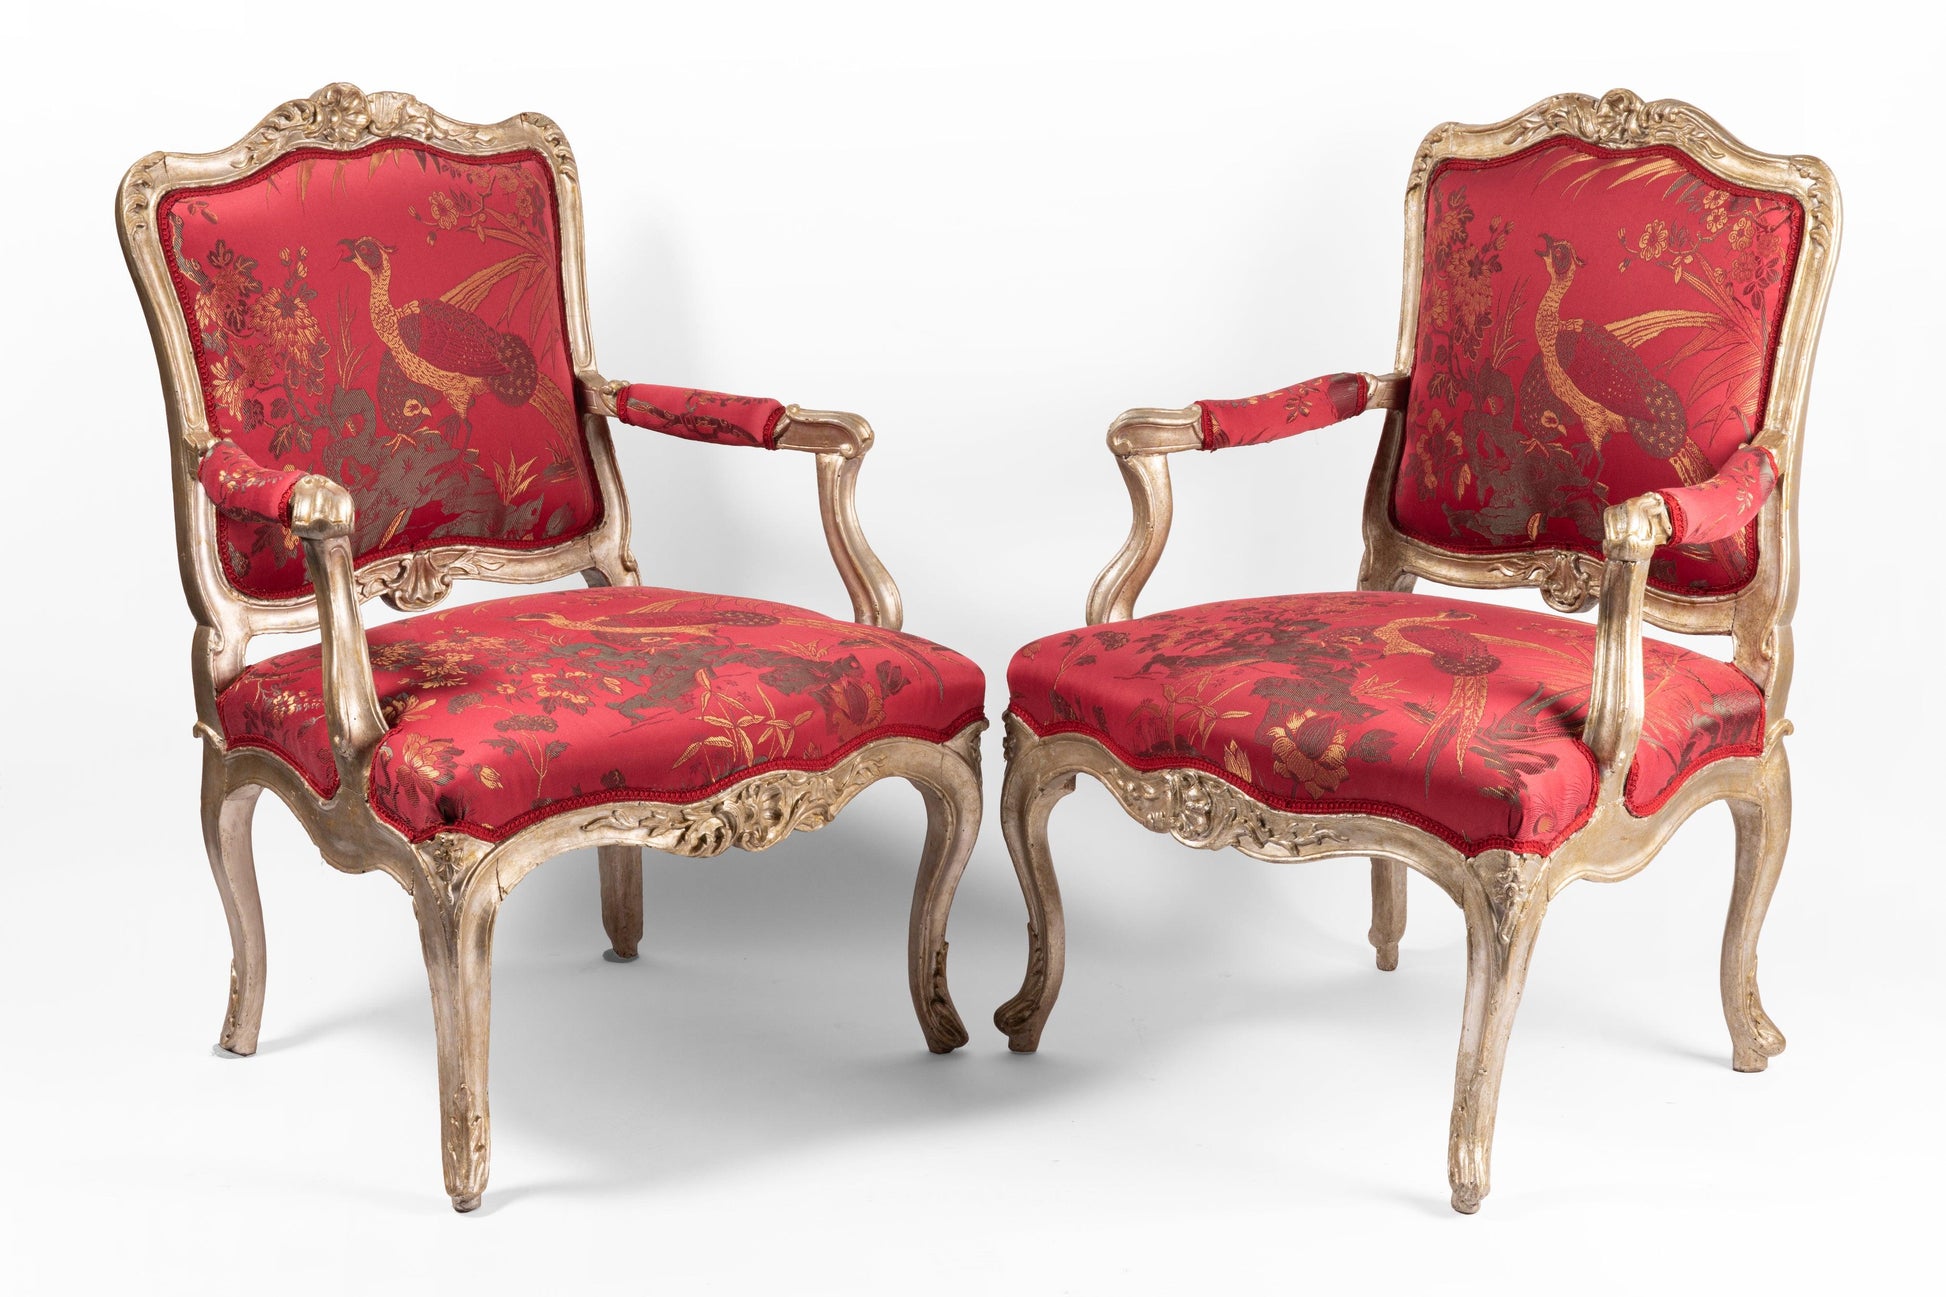 A SUPERB SET OF FOUR FRENCH 18TH CENTURY LOUIS XV ST. SILVER PATINATED ARMCHAIRS. - Galerie Rosiers